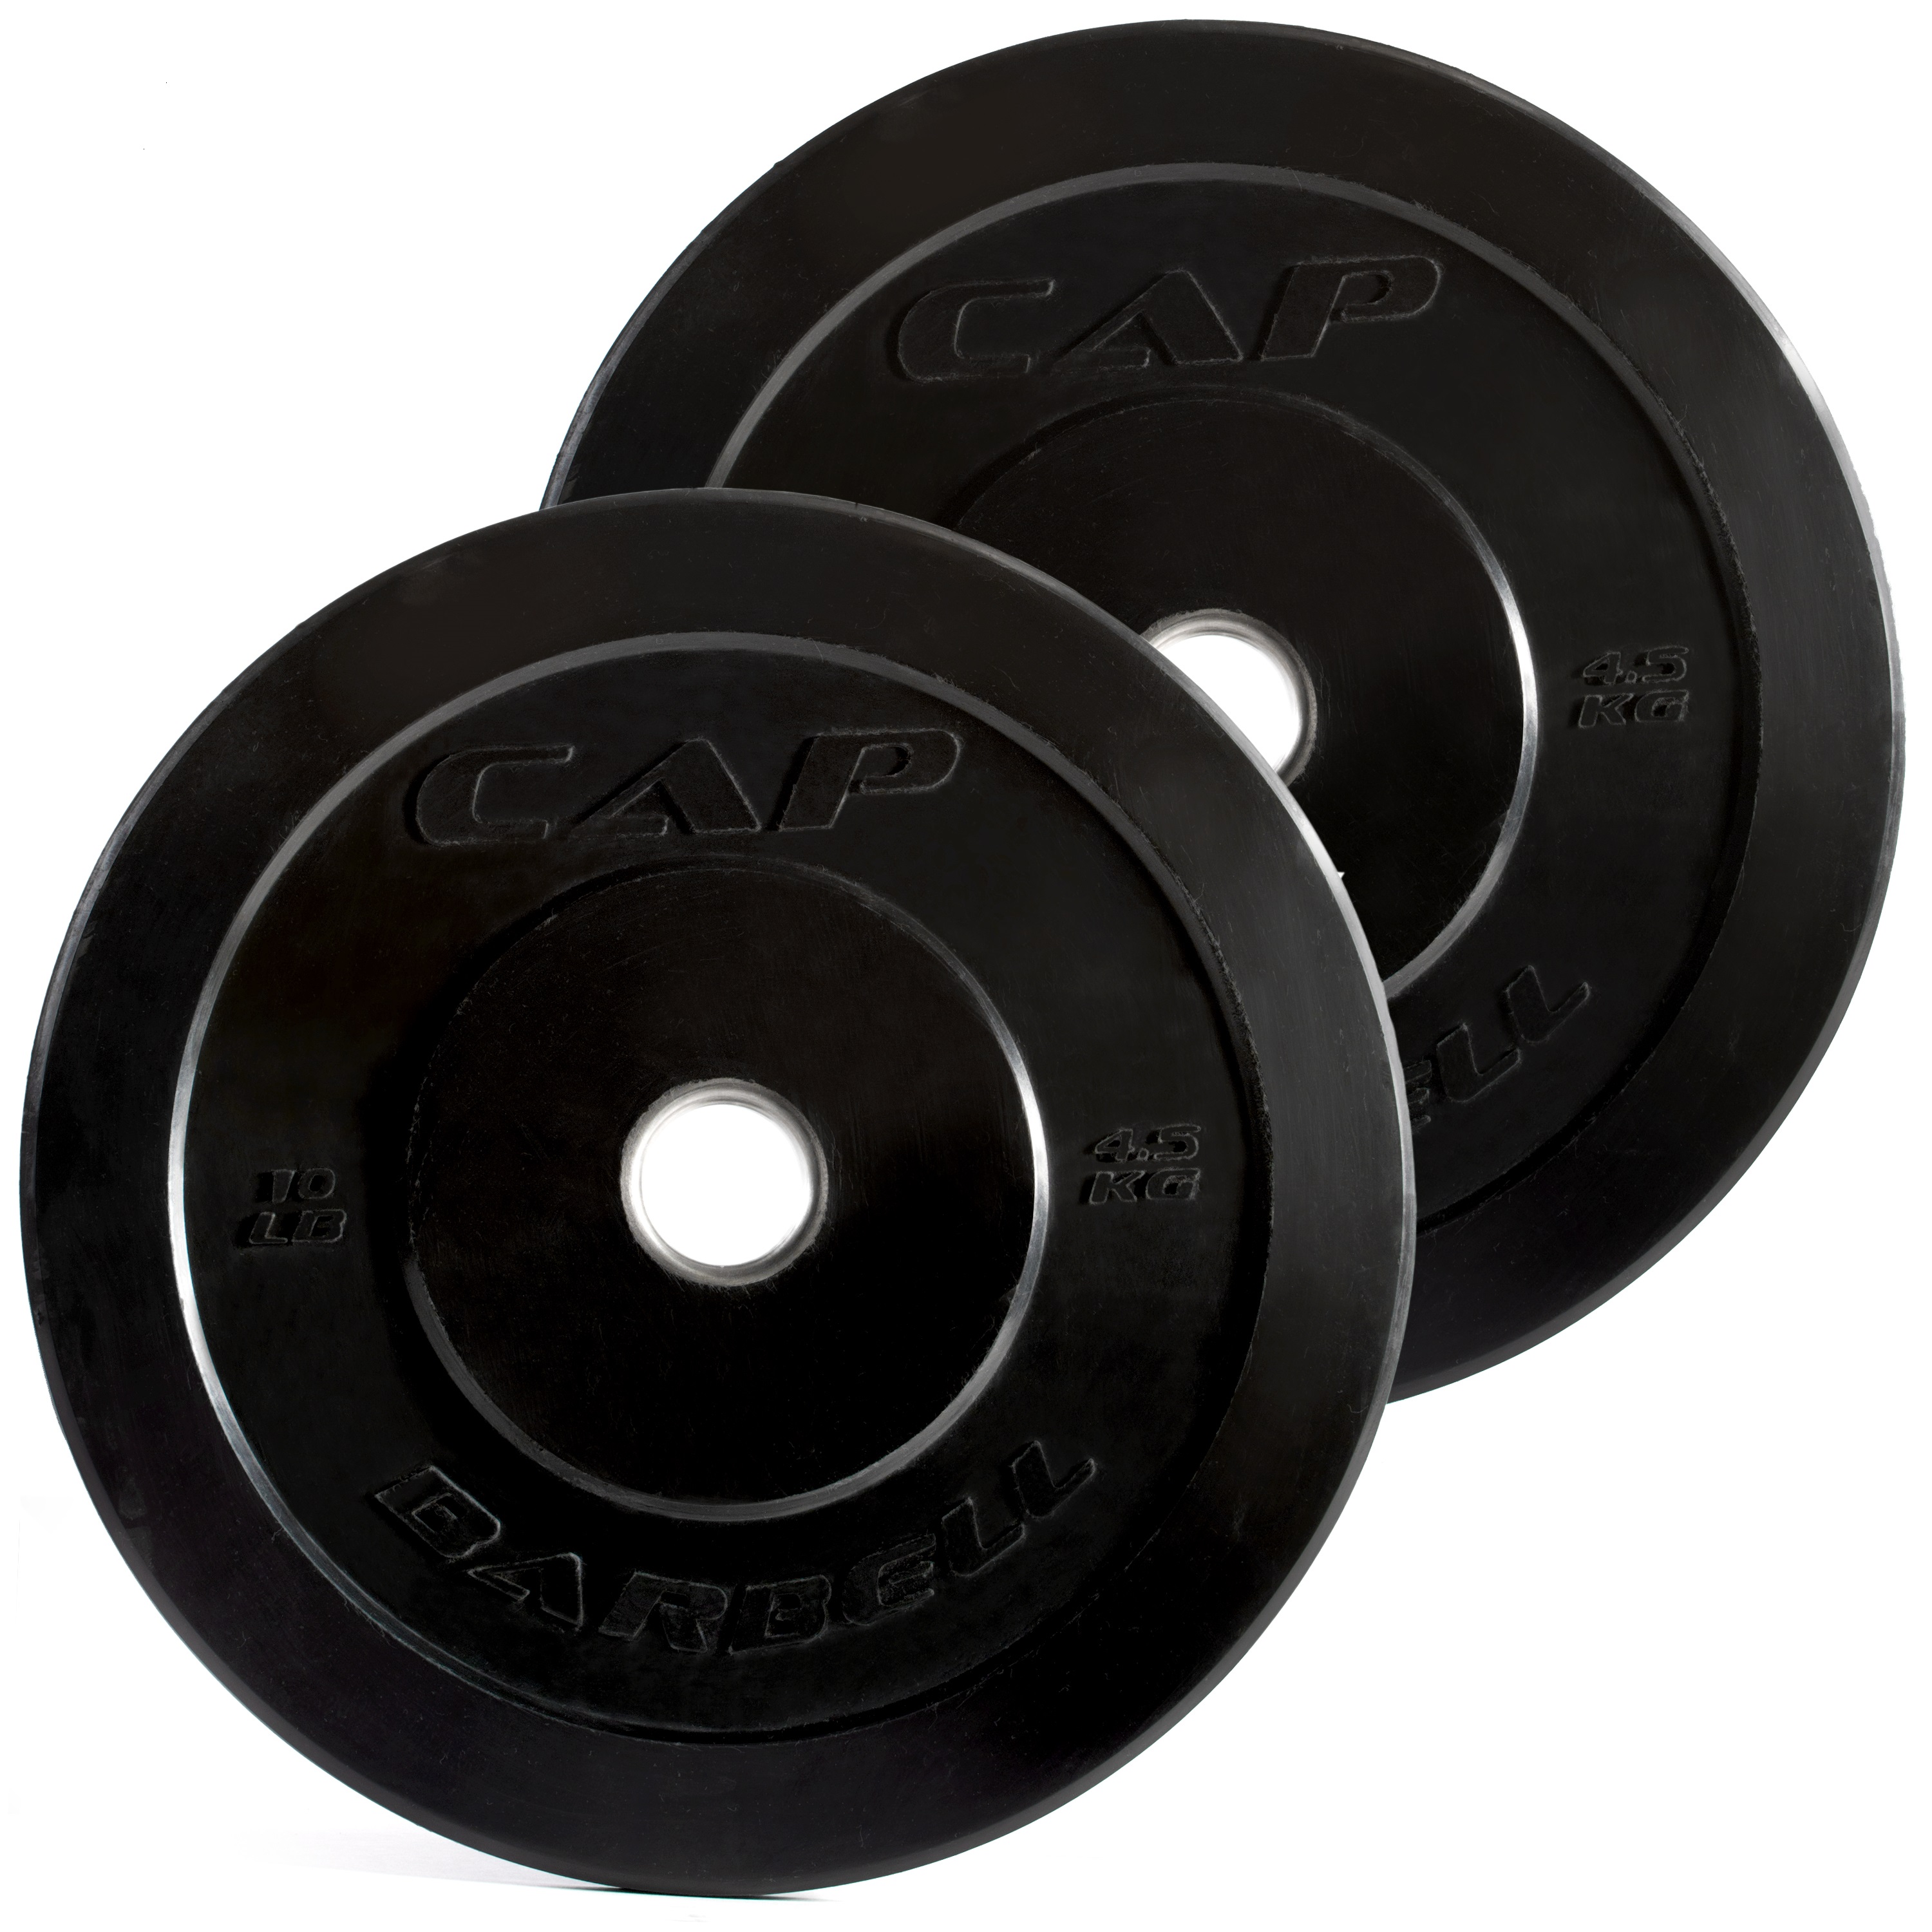 CAP Barbell - Olympic Bumper Plate Set, 20 Lbs. - image 1 of 2